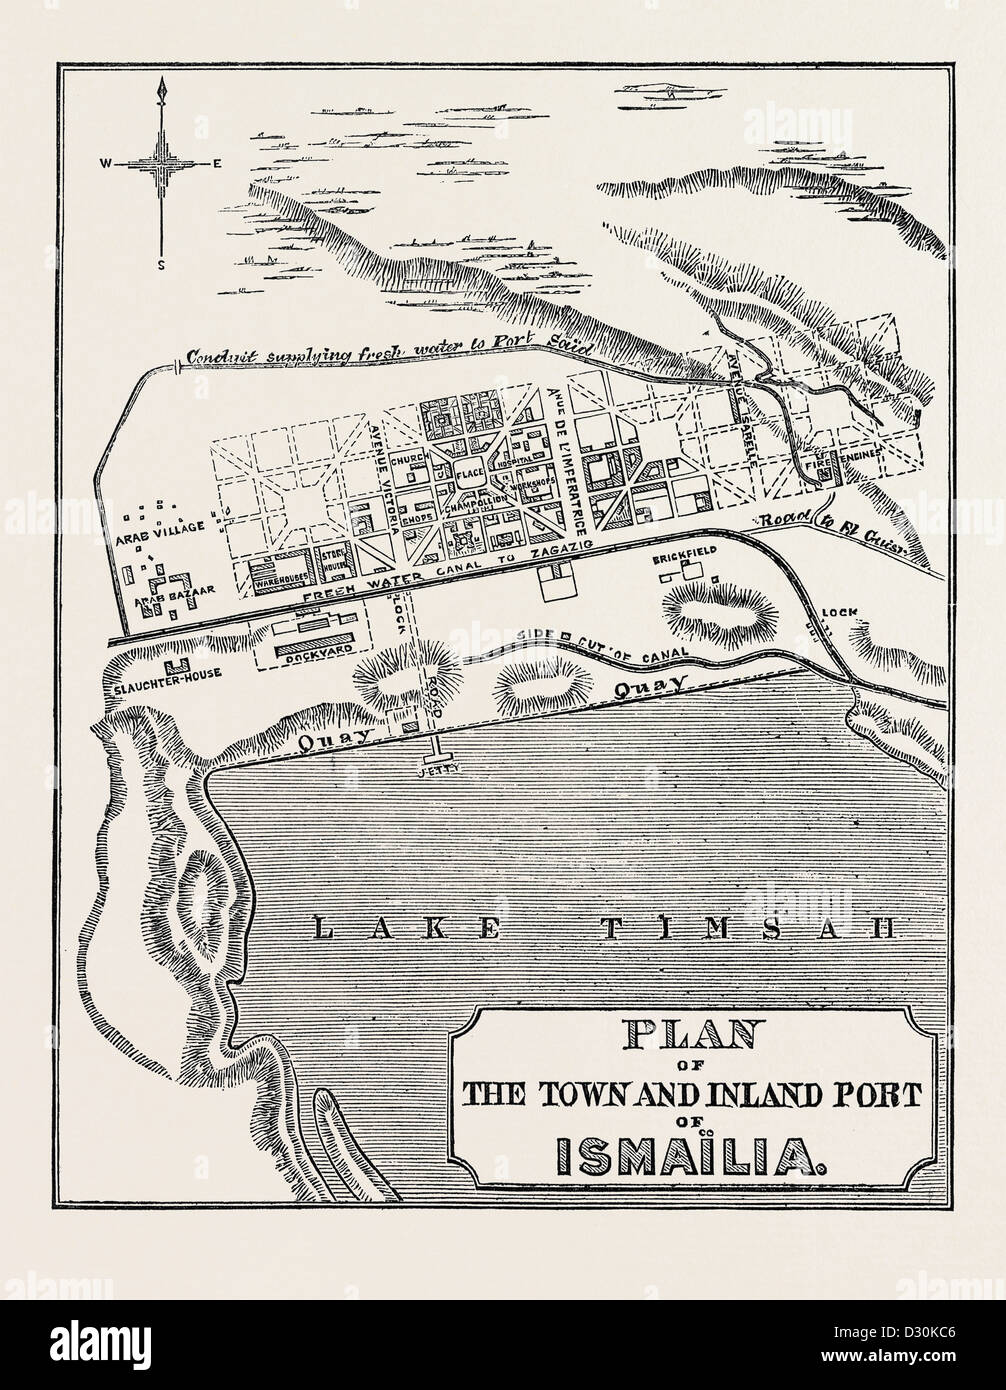 PLAN OF THE TOWN AND INLAND PORT OF ISMAÏLIA 1869 Stock Photo